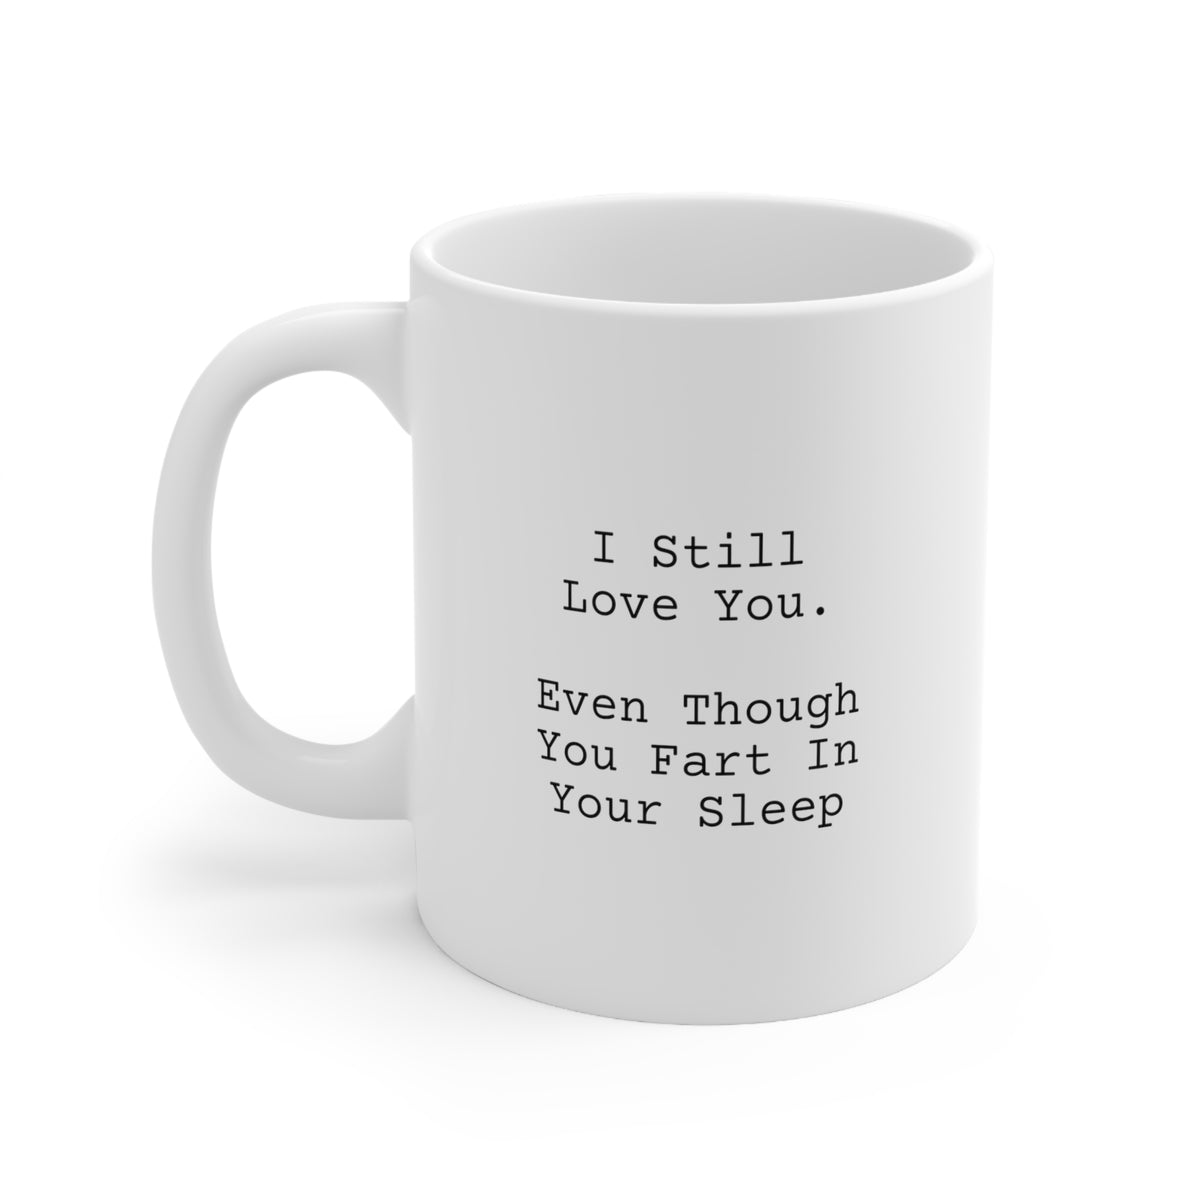 Valentine's Day, I Still Love You. Even Though You Fart In Your Sleep, Funny Coffee Mug For Him Her, Love Cup For Wife Husband